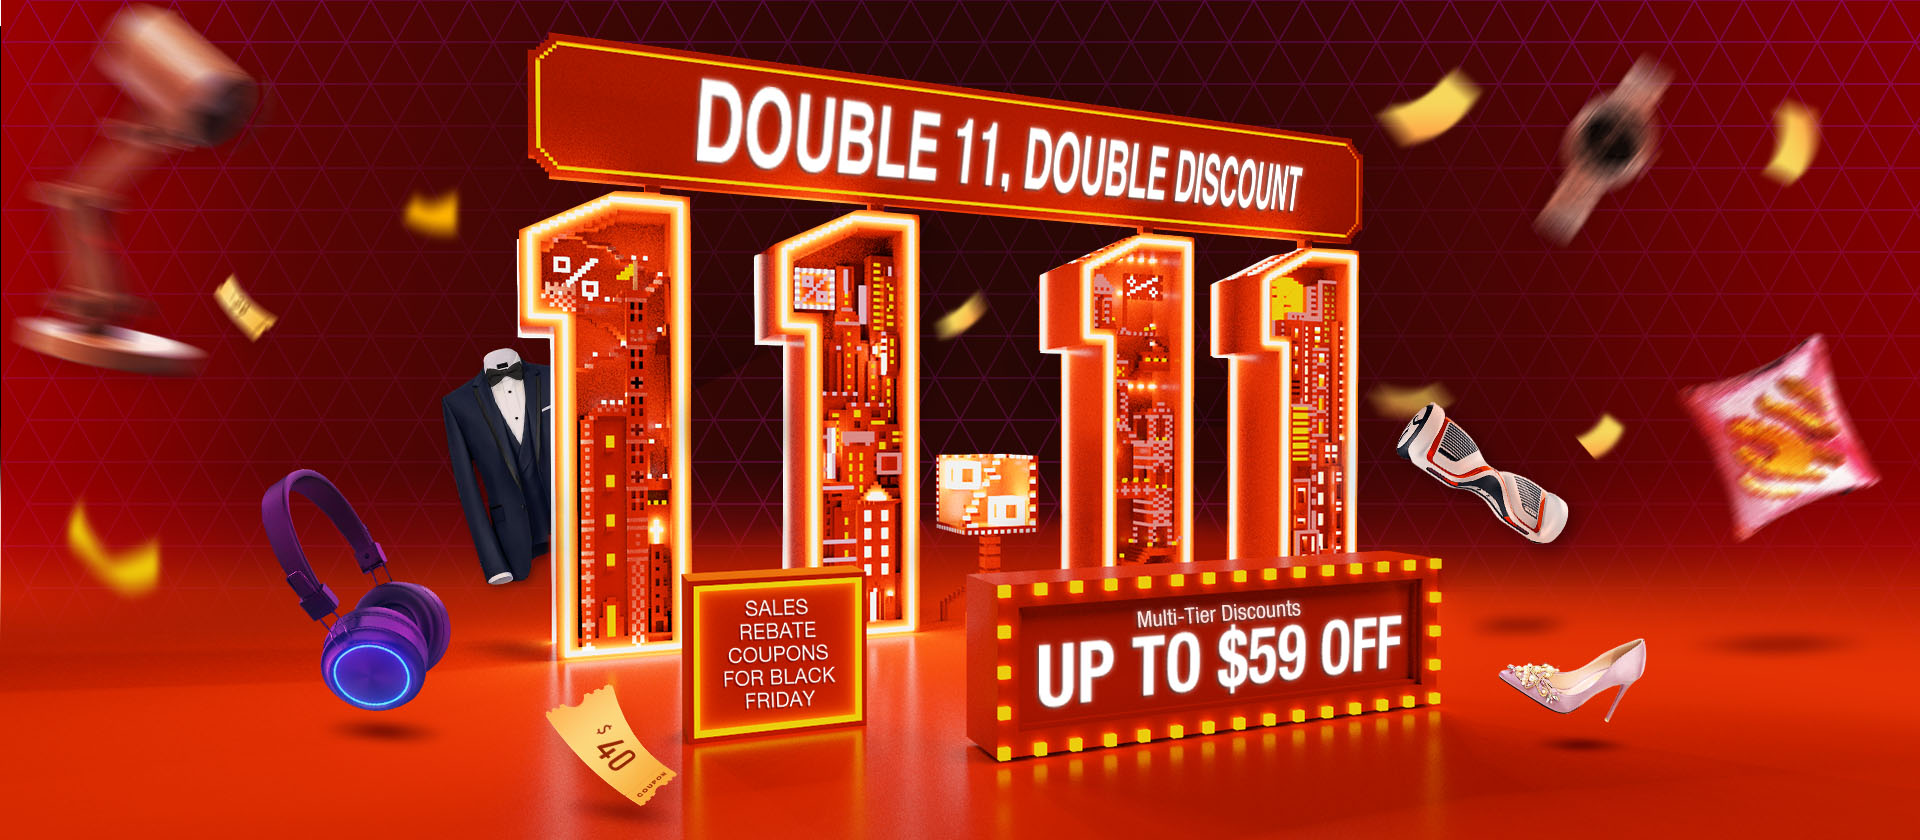 DHgate Double 11 Promotion in 2022, up to $59 off multi-tier discounts